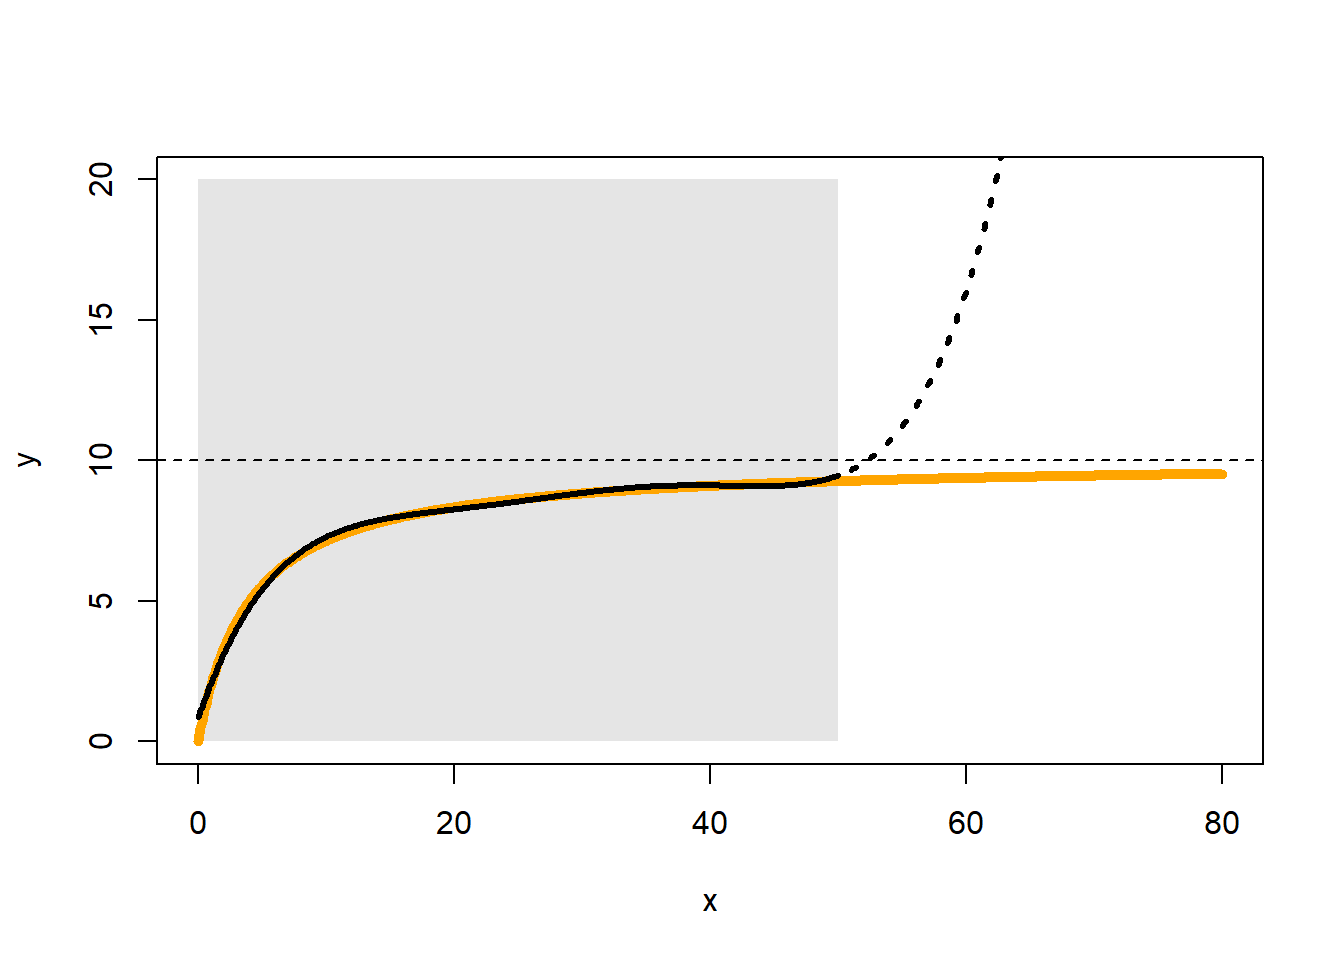 Our ability to describe saturating responses with polynomials is limited to the window of approximation (shown in grey) and the approximation is parameter-greedy. The saturating curve shown in orange, approaches an asymptote at the value 10. The approximating polynomial is based on the values of the orange curve within the grey window. It takes a 5th-order polynomial to achieve a convincing approximation (i.e. 6 parameters in total) and the approximation goes awry, immediately after we exit the grey window.